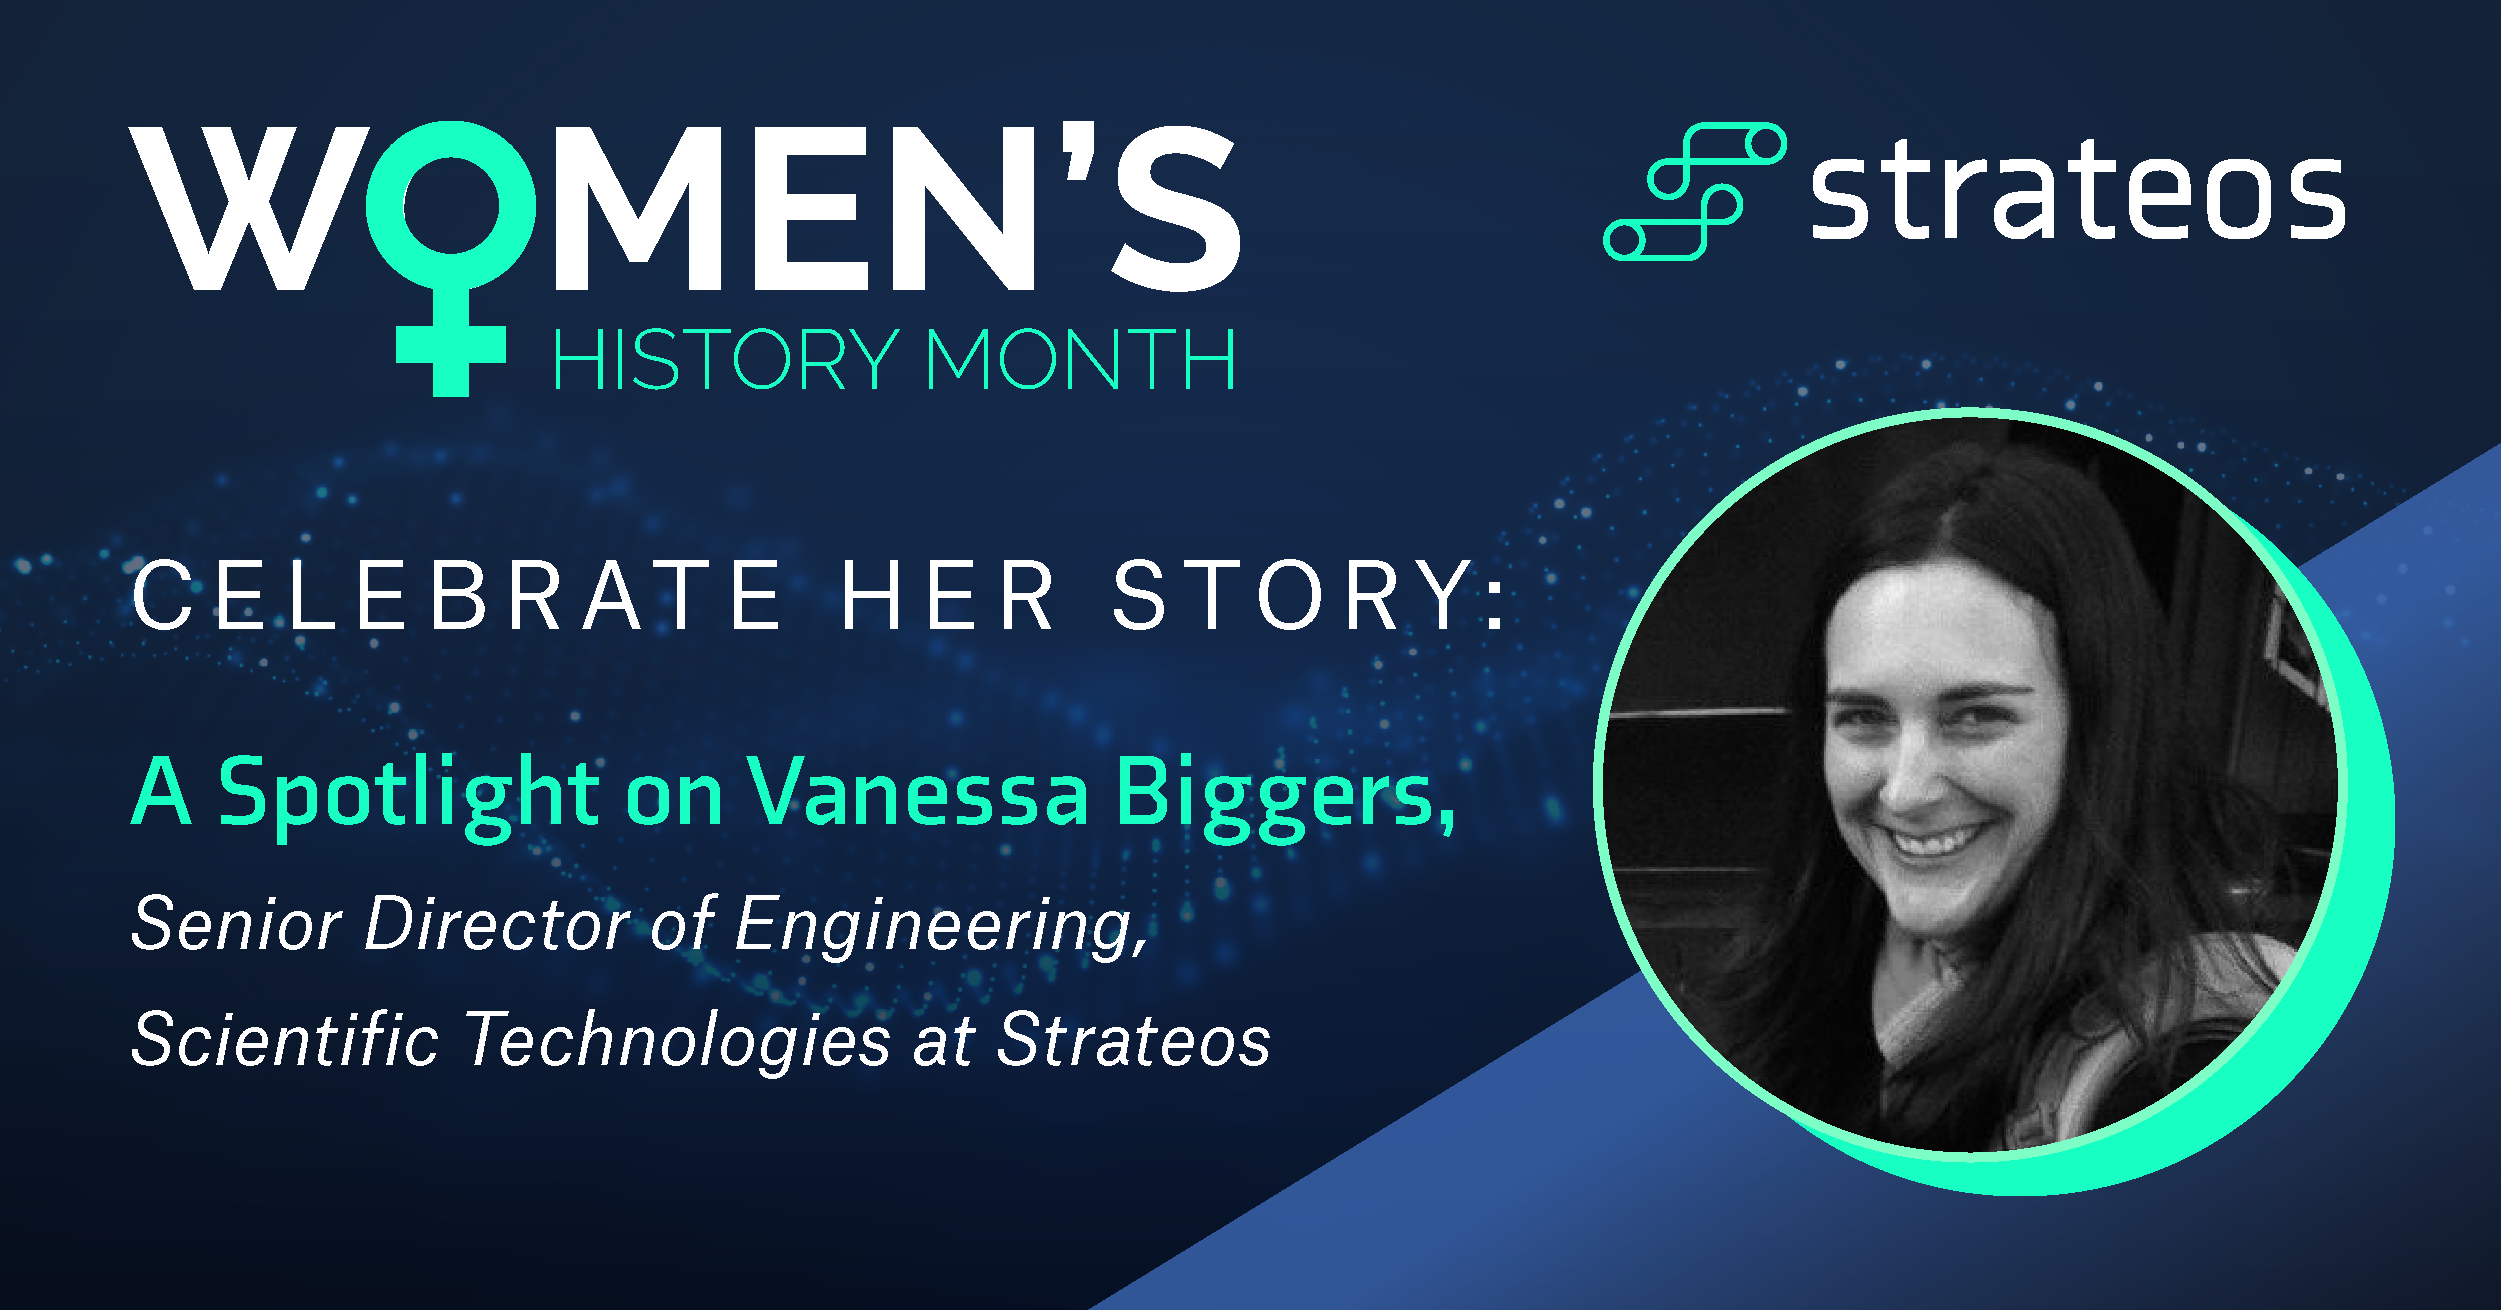 Celebrate Her Story:  A Spotlight on Vanessa Biggers, Senior Director of Engineering, Scientific Technologies at Strateos